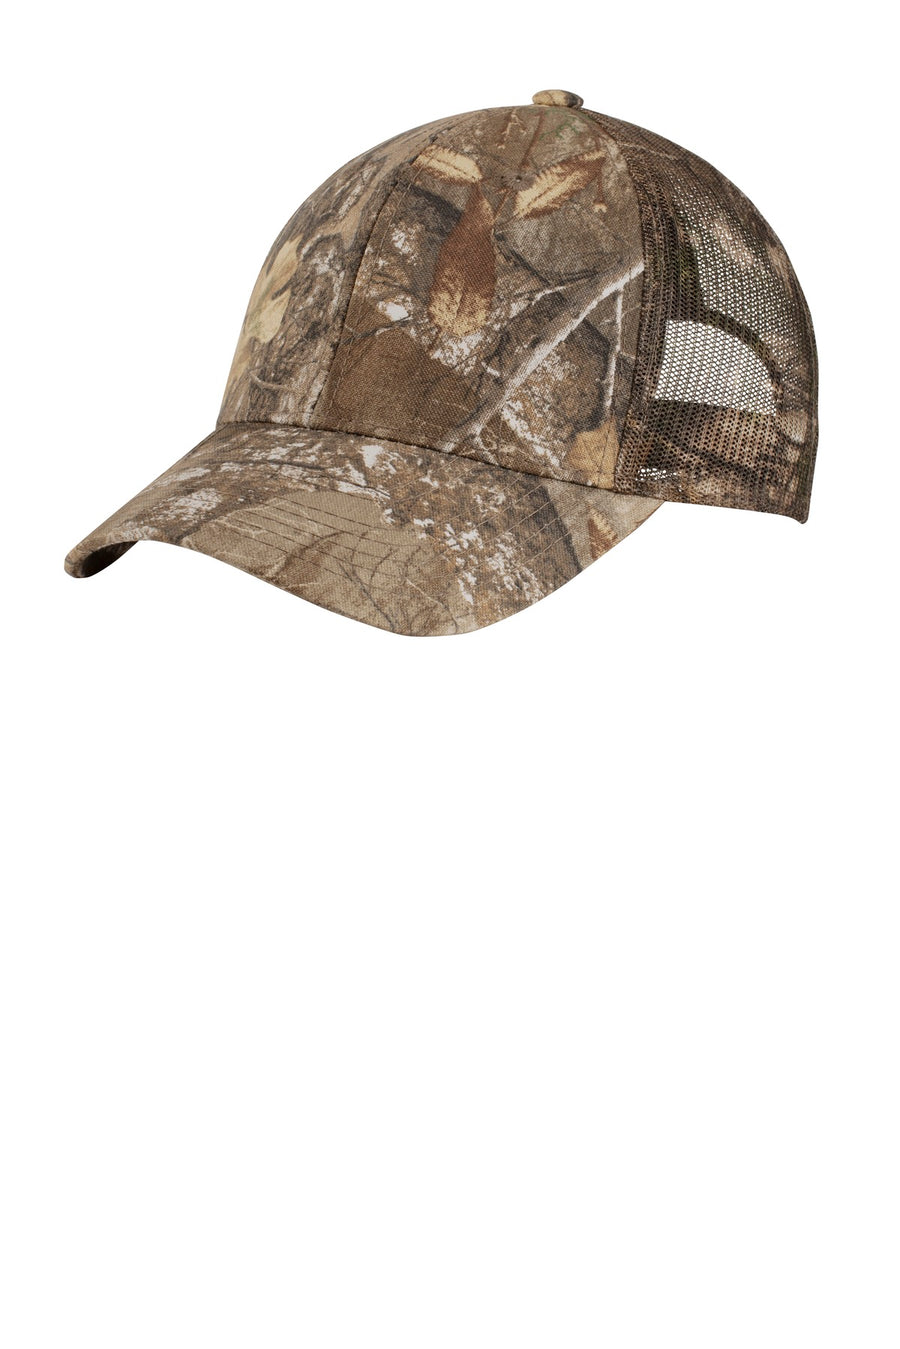 Port Authority¬Æ Pro Camouflage Series Cap with Mesh Back.  C869